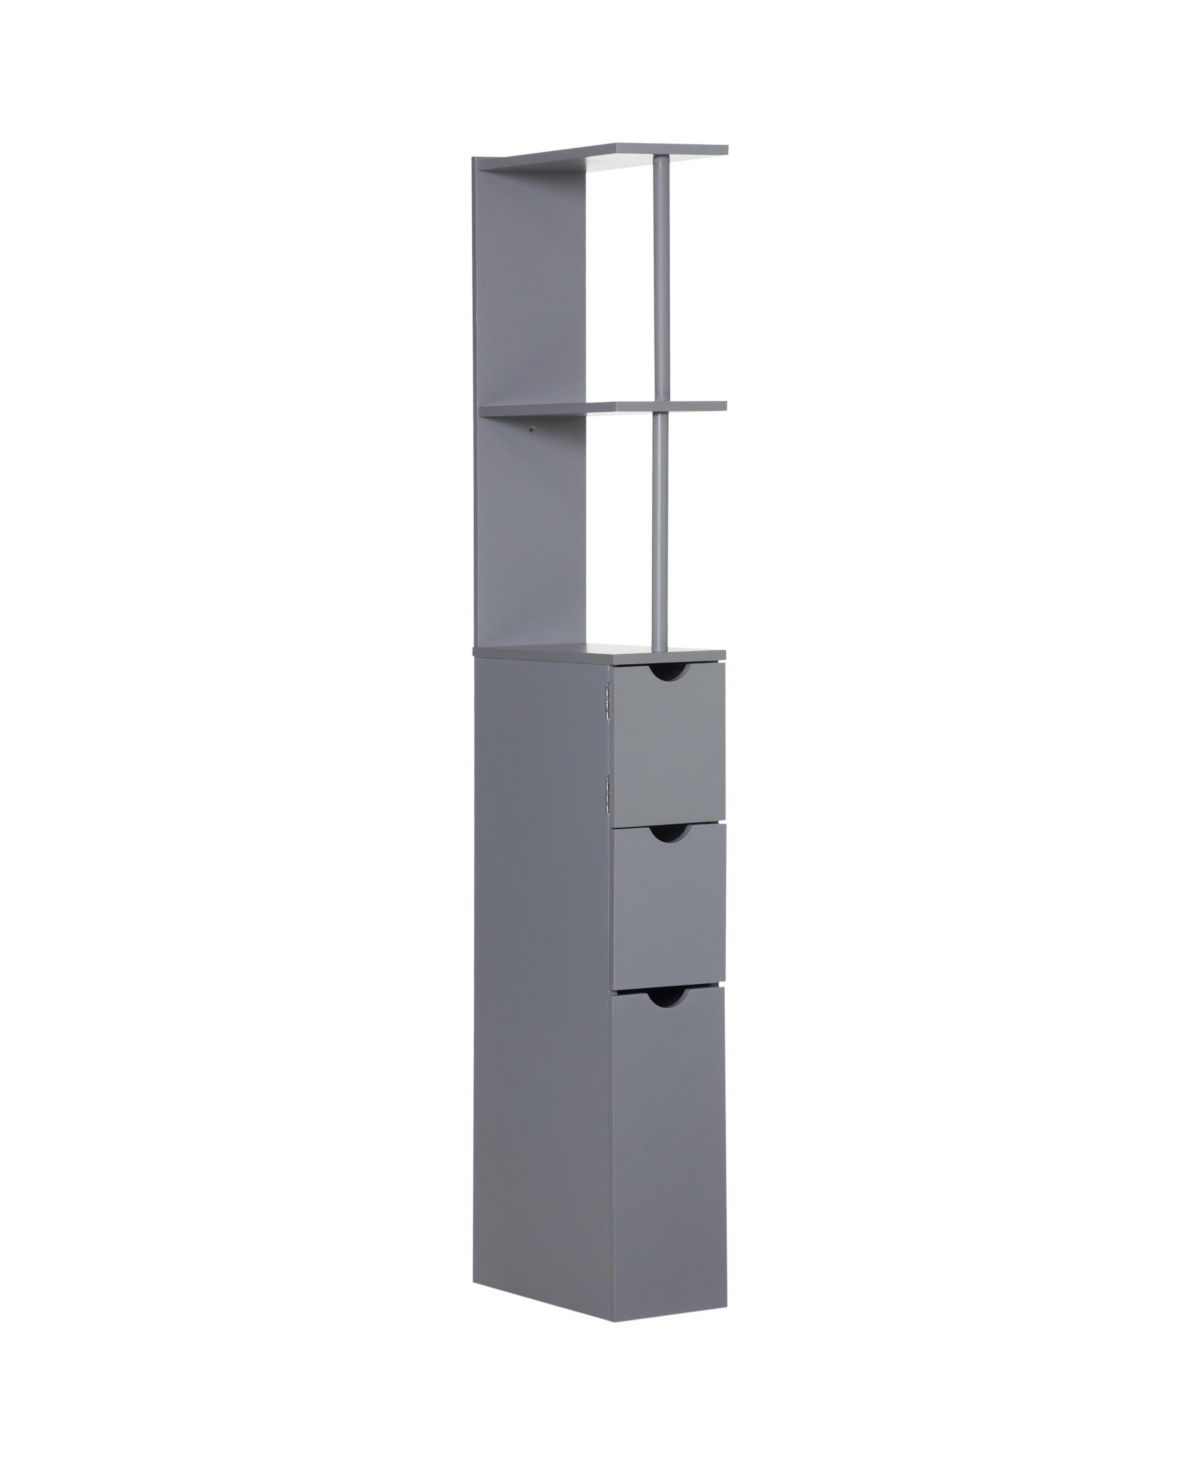 53.75" Tall Bathroom Storage Cabinet, Freestanding Linen Tower with 2-Tier Shelf and Drawers, Narrow Side Floor Organizer, Grey - Open Grey